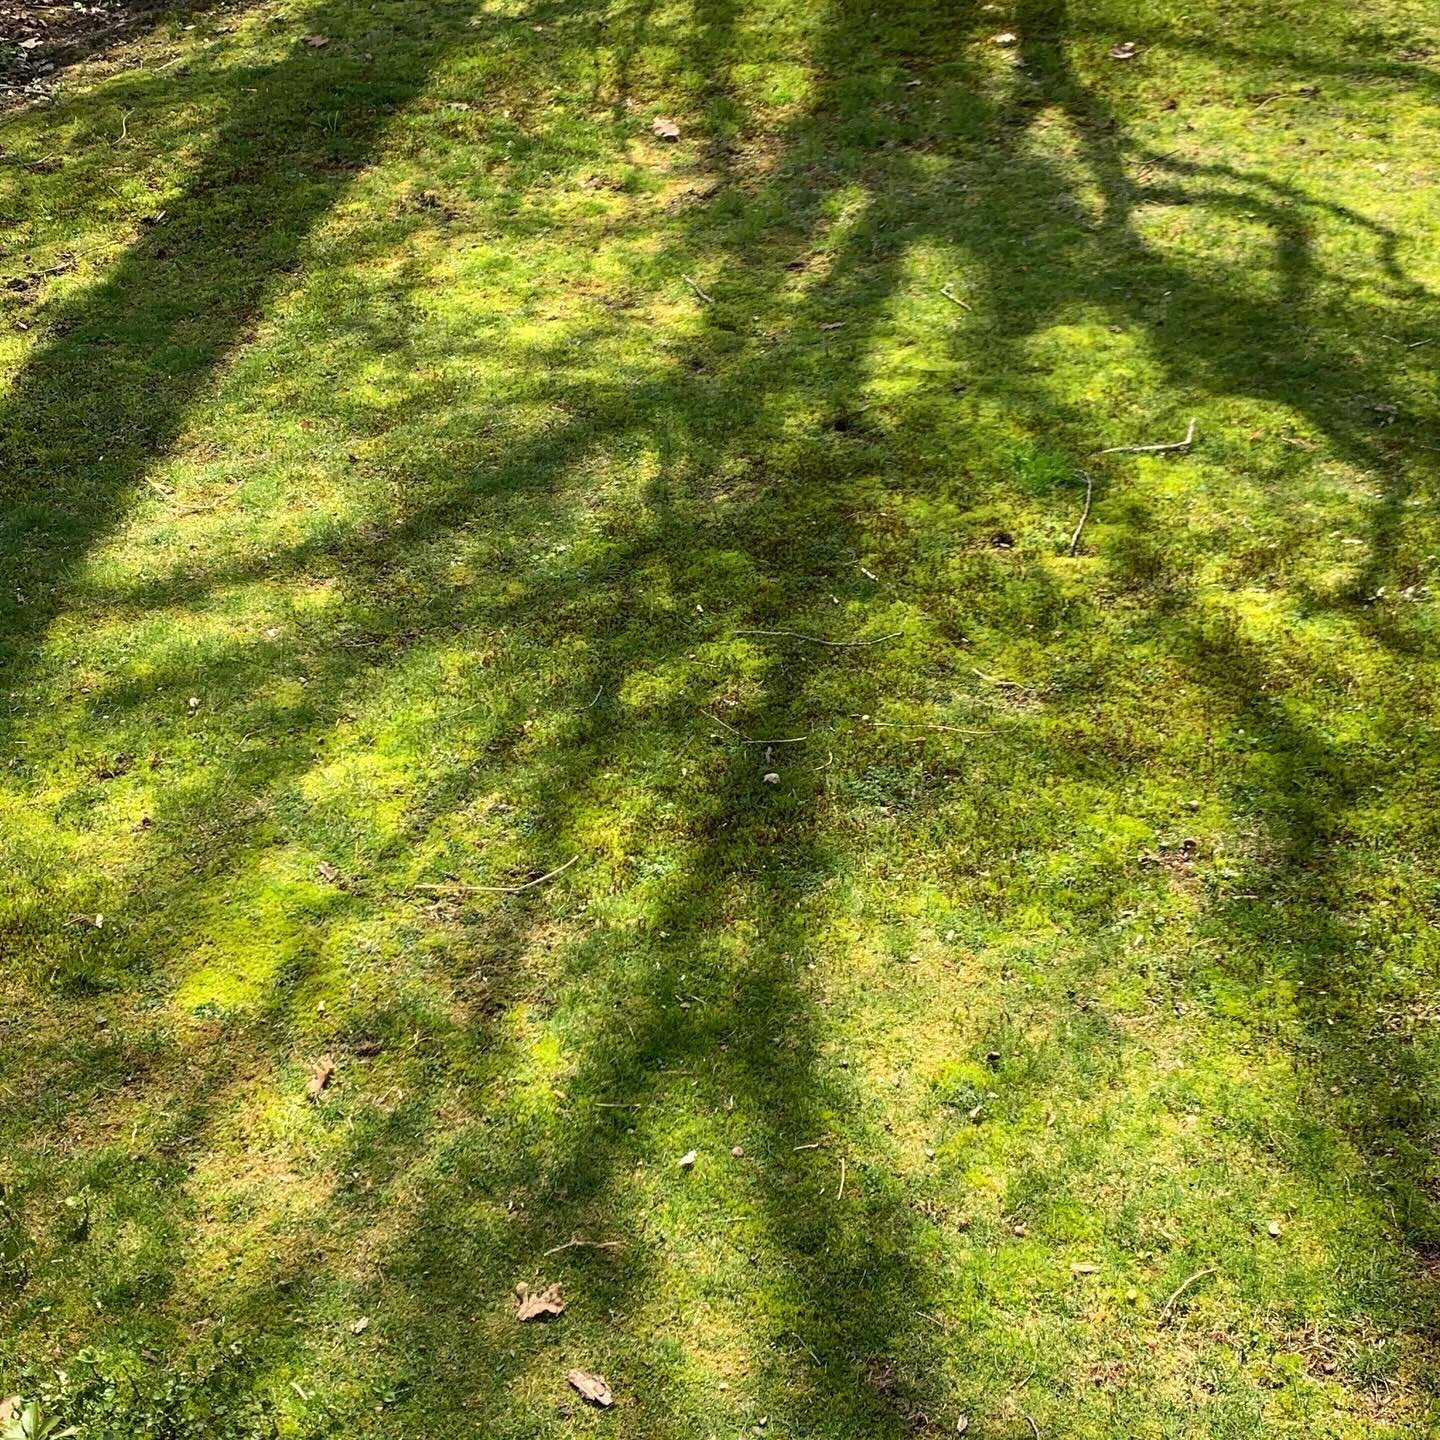 I probably take some version of these photos every year at this time. I can&rsquo;t help it. The moss before the grass takes over and the shadows before the leaves obscure the tree trunks&hellip; It all composes itself quite nicely. #moss #mossterrar